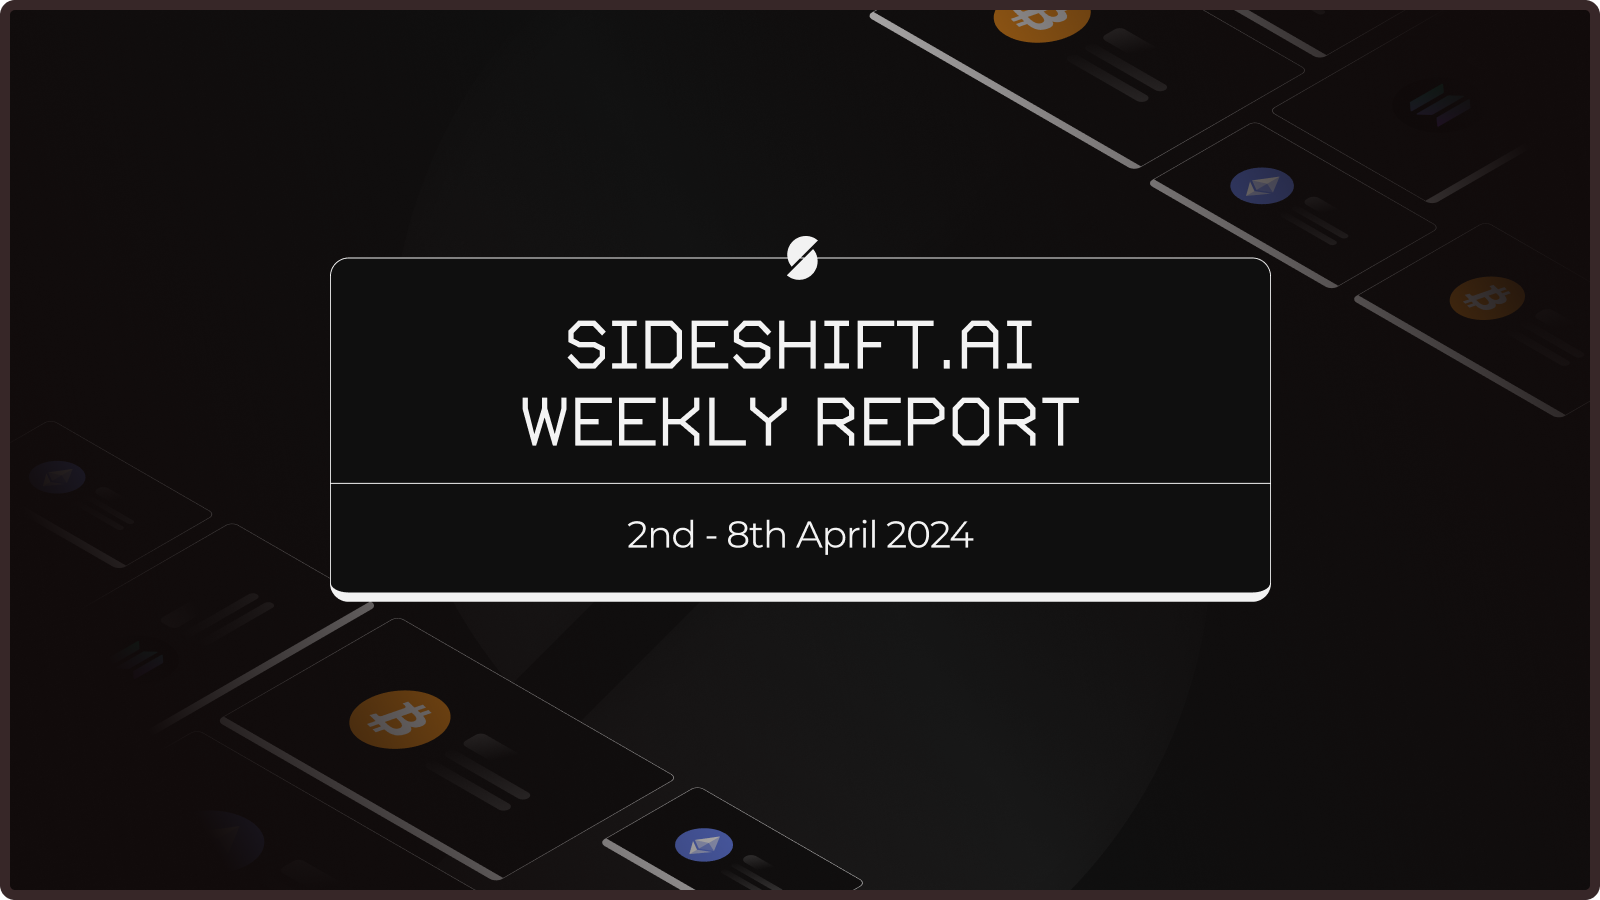 SideShift.ai Weekly Report | 2nd - 8th April 2024